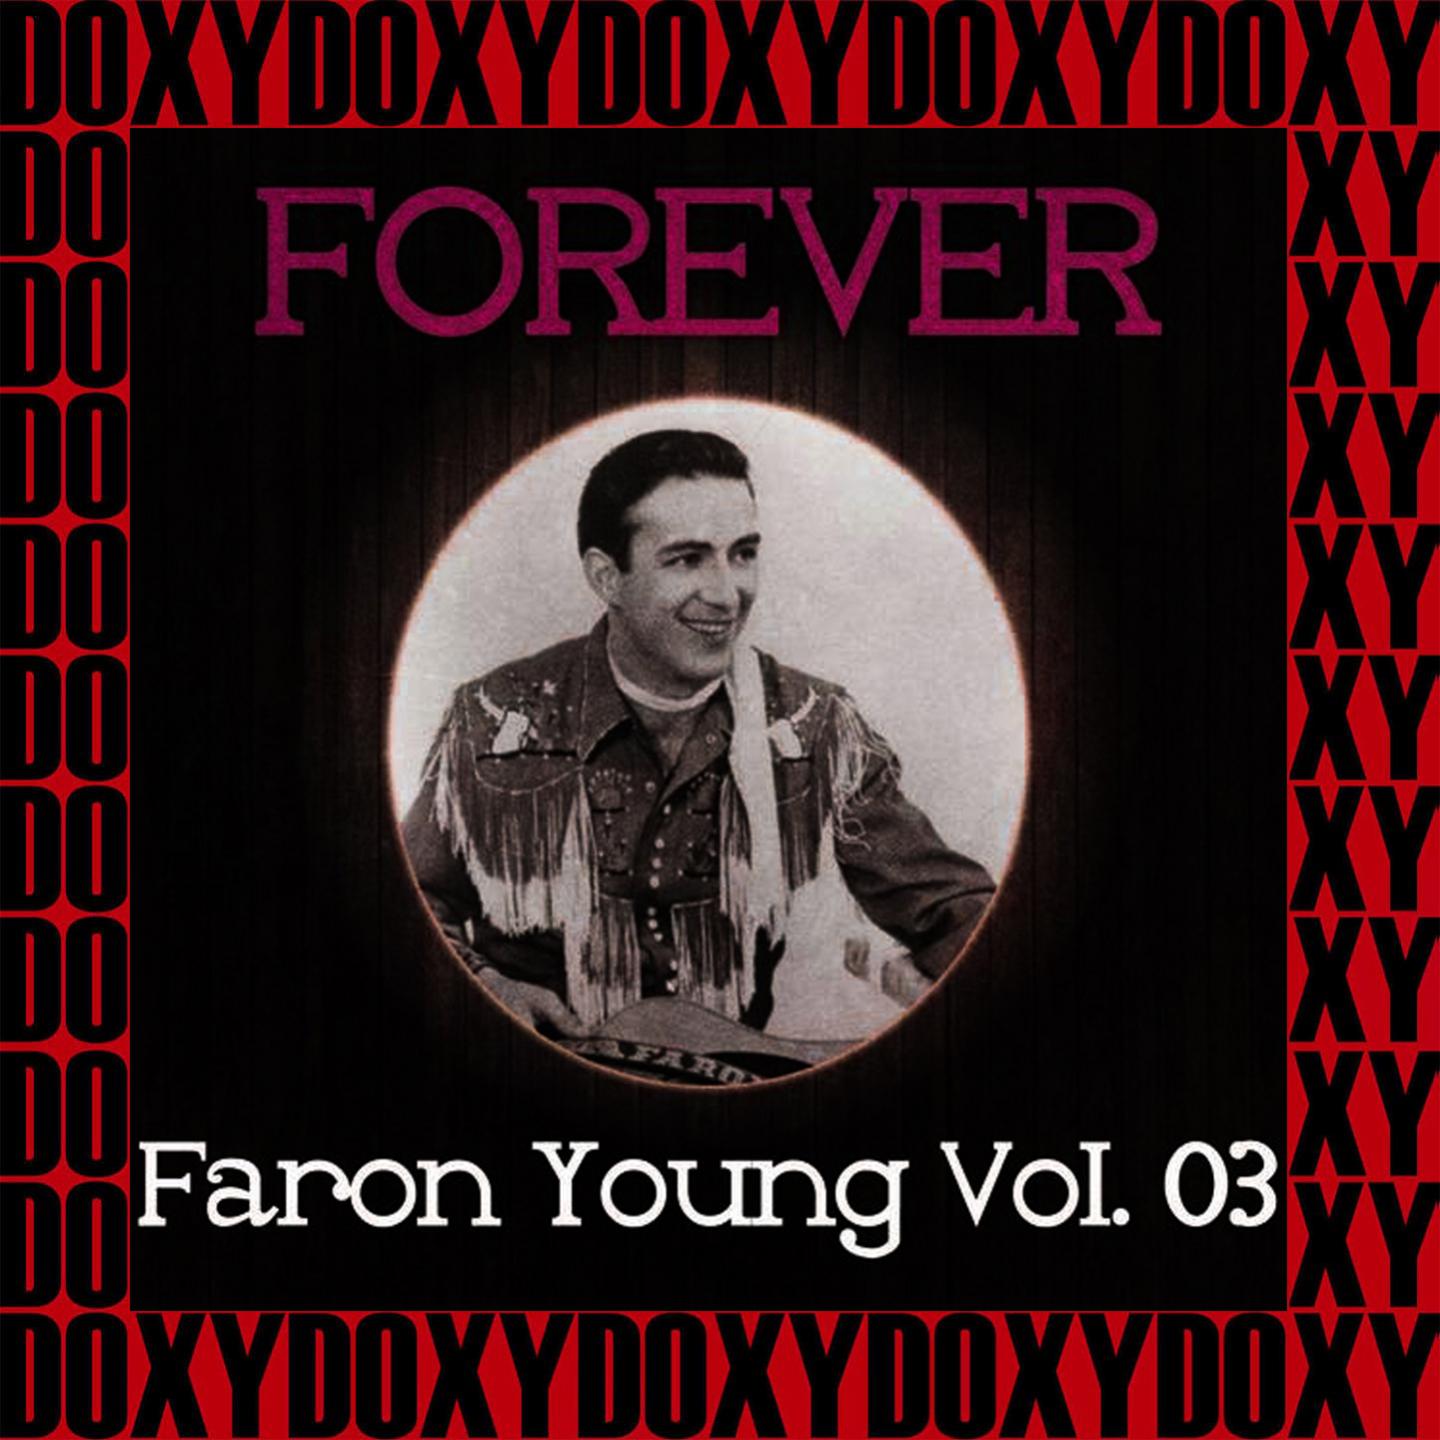 Forever Faron Young Vol. 3 (Remastered Version) (Doxy Collection)